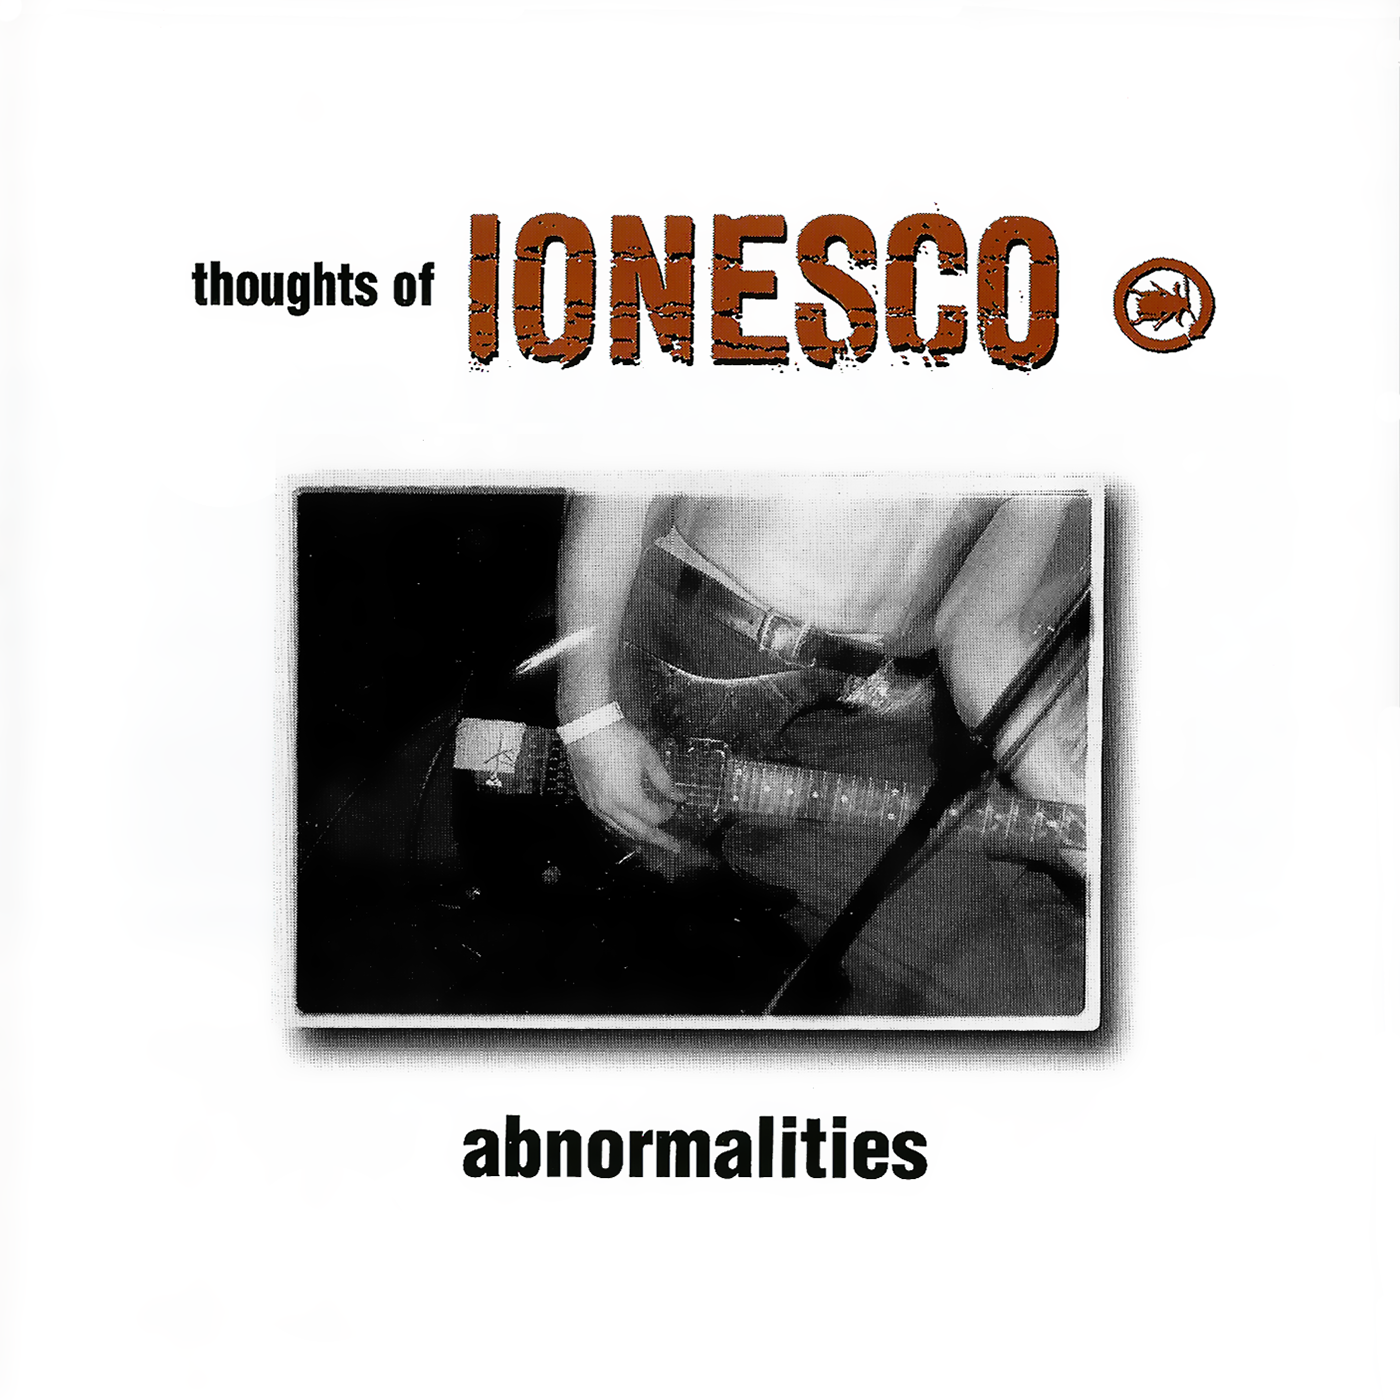 C.A.S.S. Works #9 - Thoughts of Ionesco "Abnormalities", CD, 2000